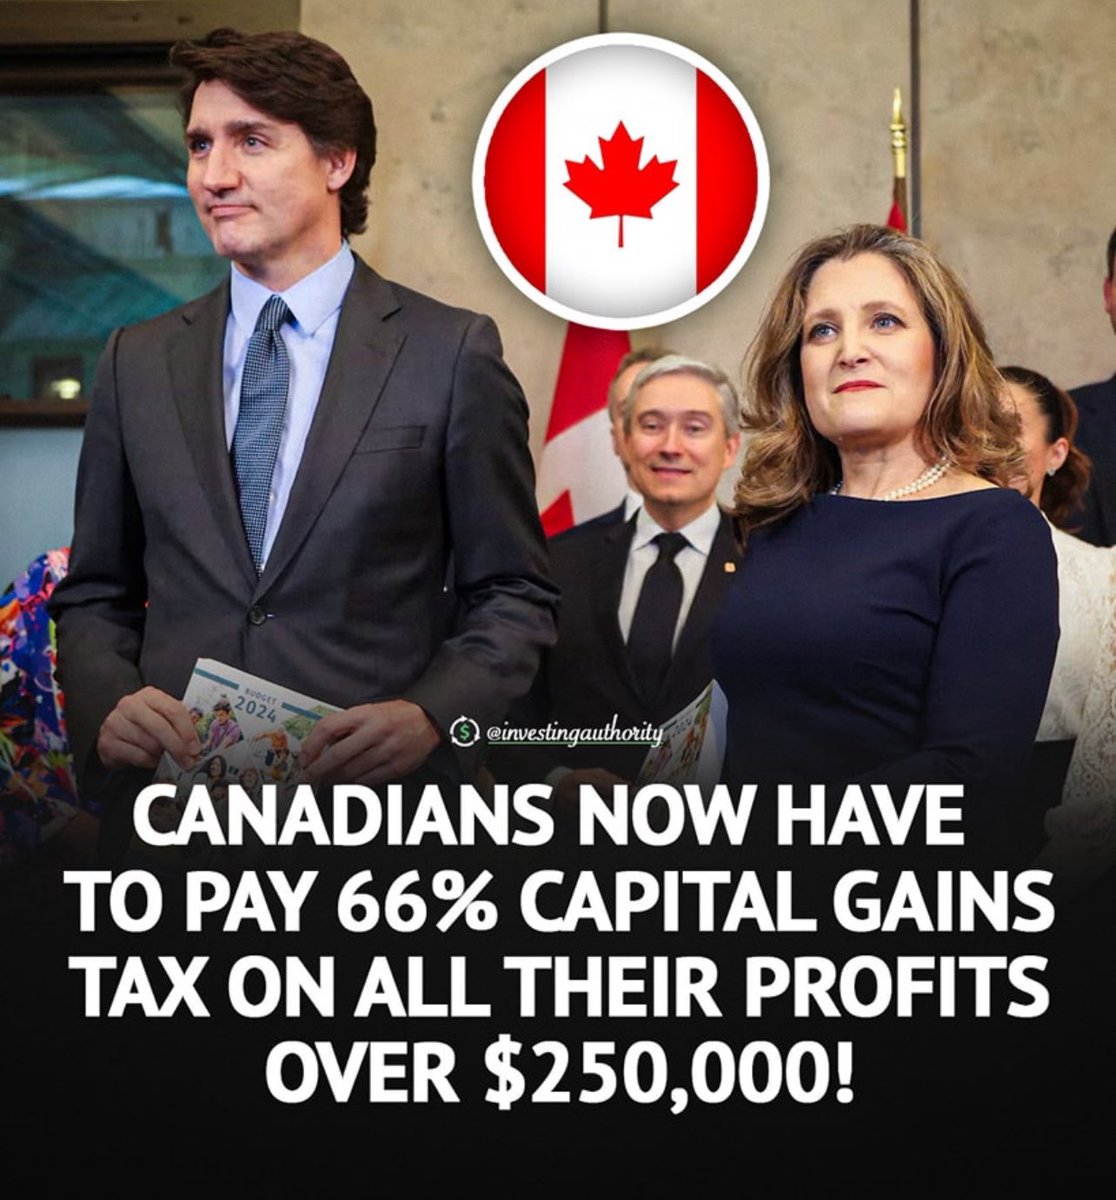 BREAKING: #Canada increases capital gains tax to 66%!

Governments are out of control. Prepare yourself.